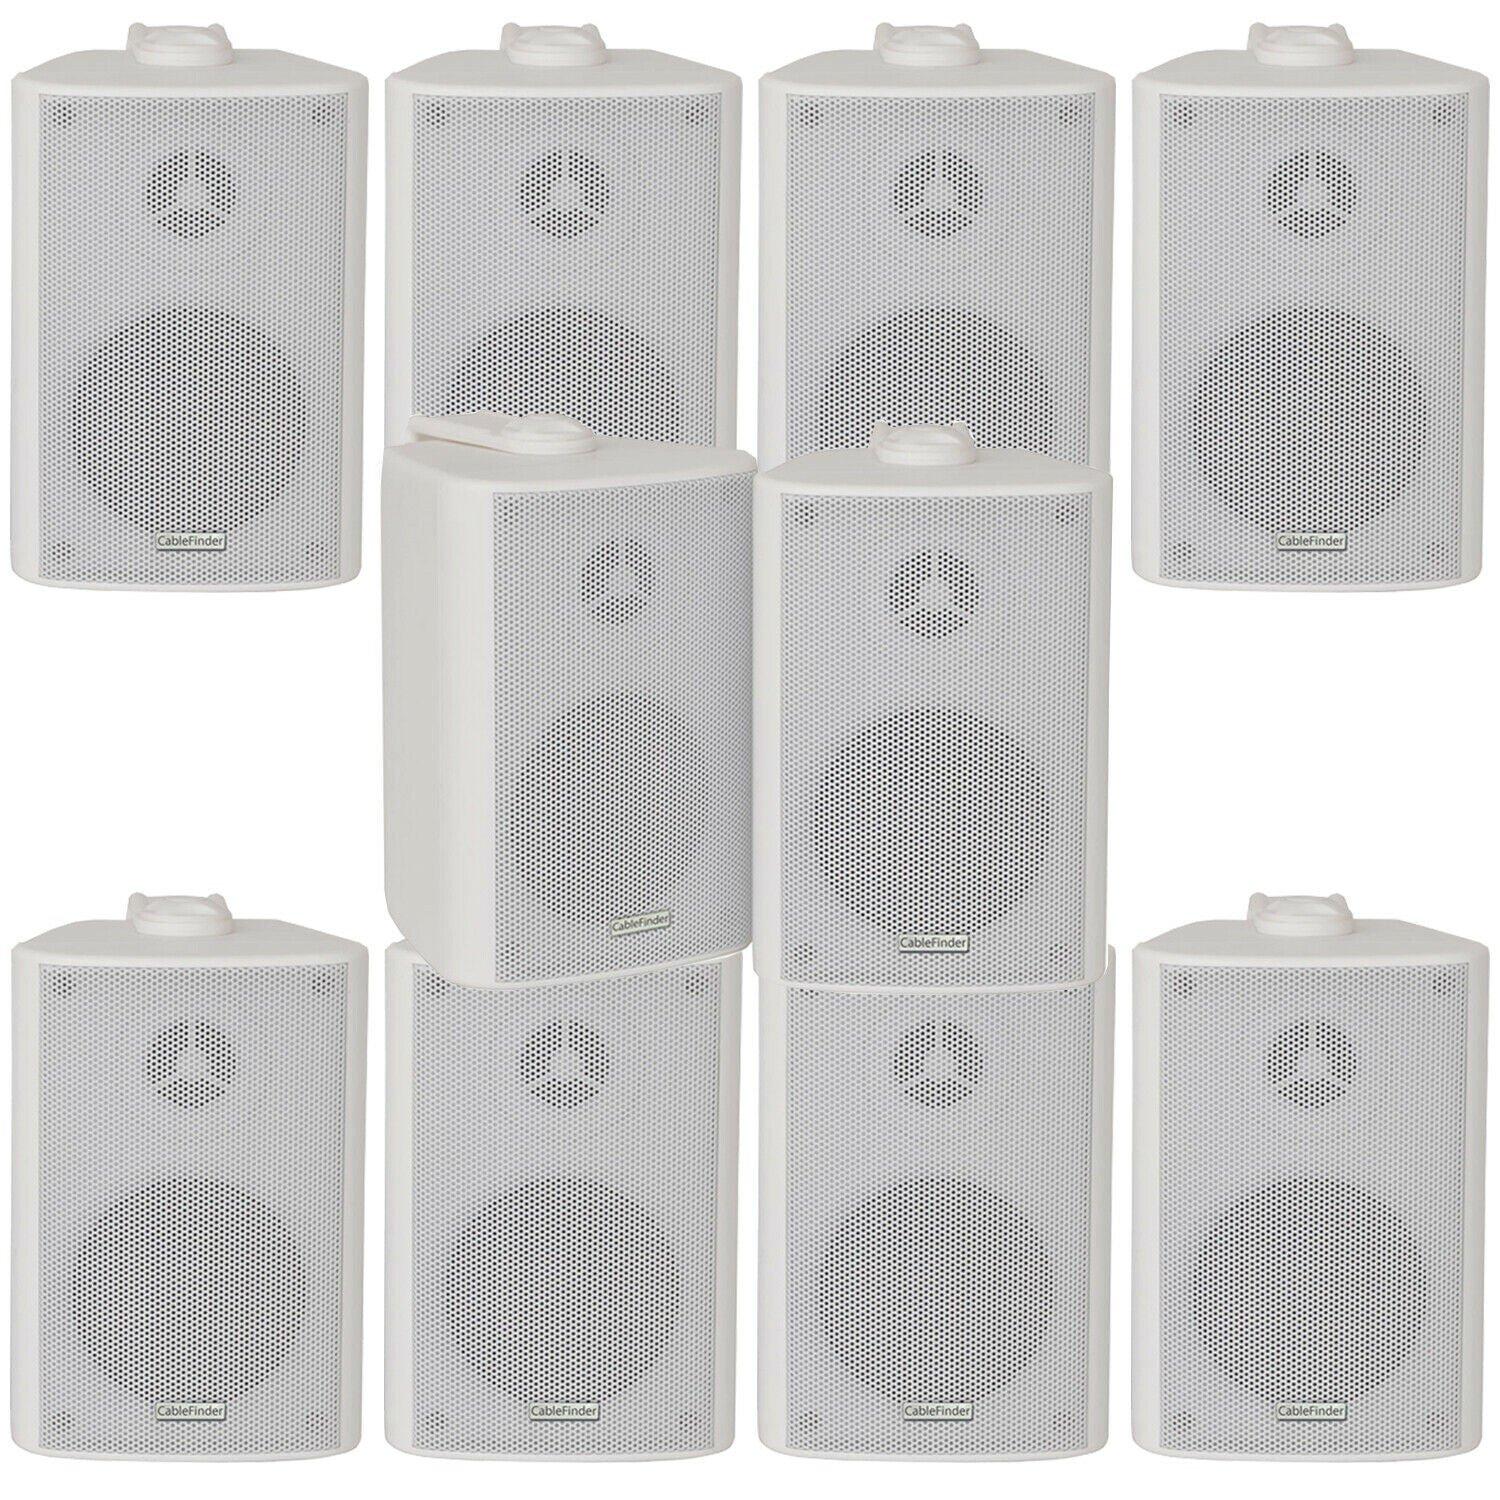 10x 70W 2 Way White Wall Mounted Stereo Speakers 4